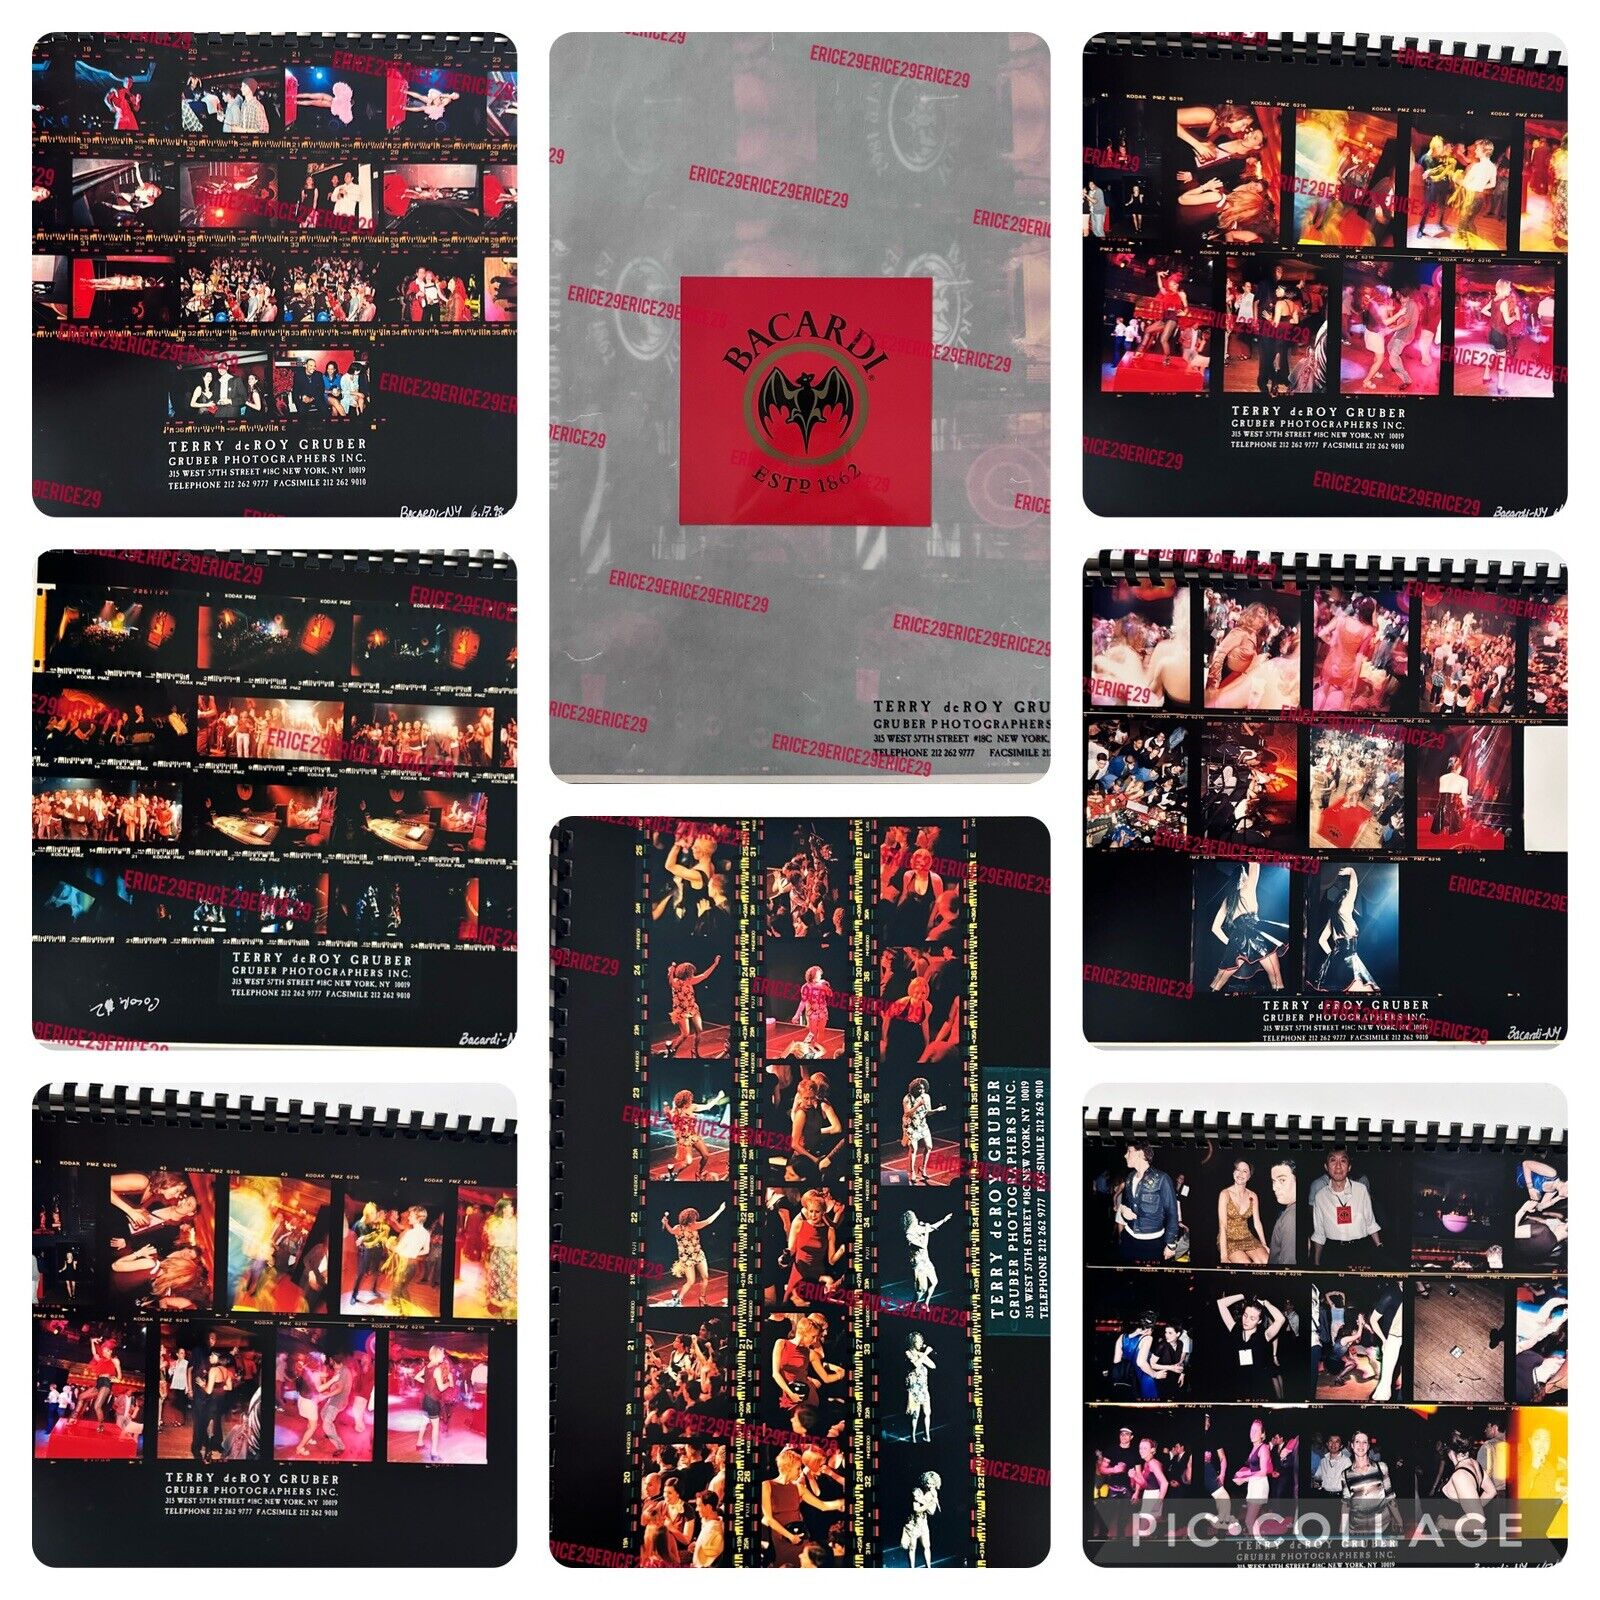 1998 Terry deRoy Gruber Studio 54 NYC Bacardi Campaign 52 Contact Sheets Book